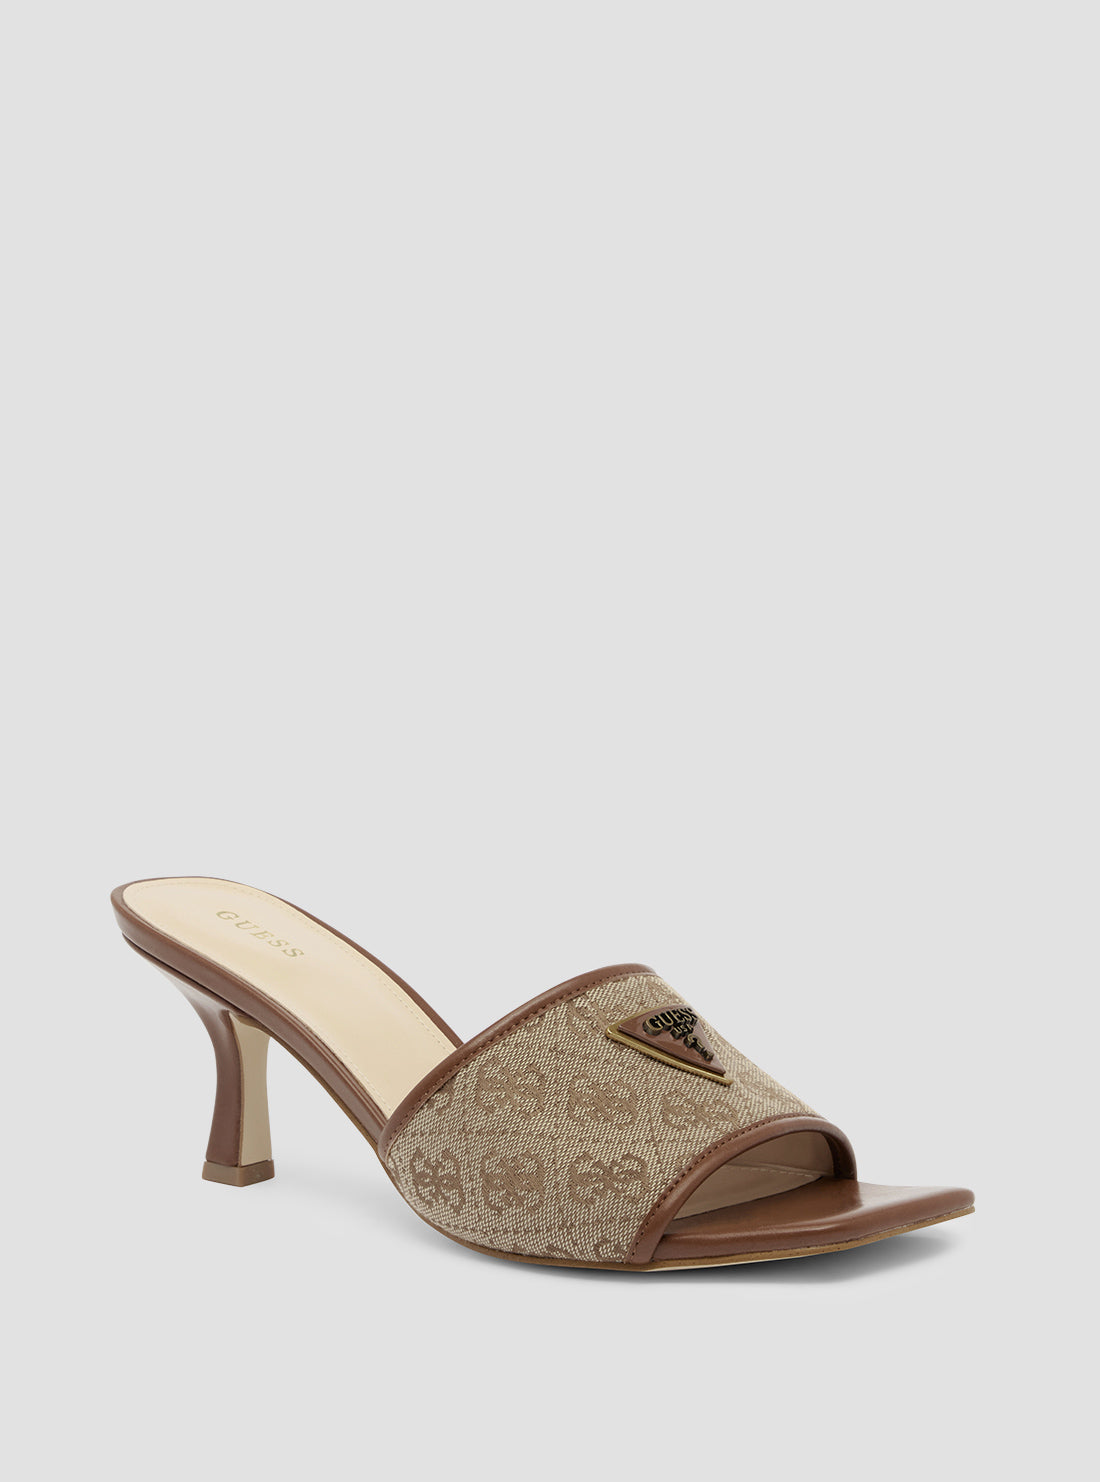 Brown Rinit Kitten Heels | GUESS Women's Shoes | front view